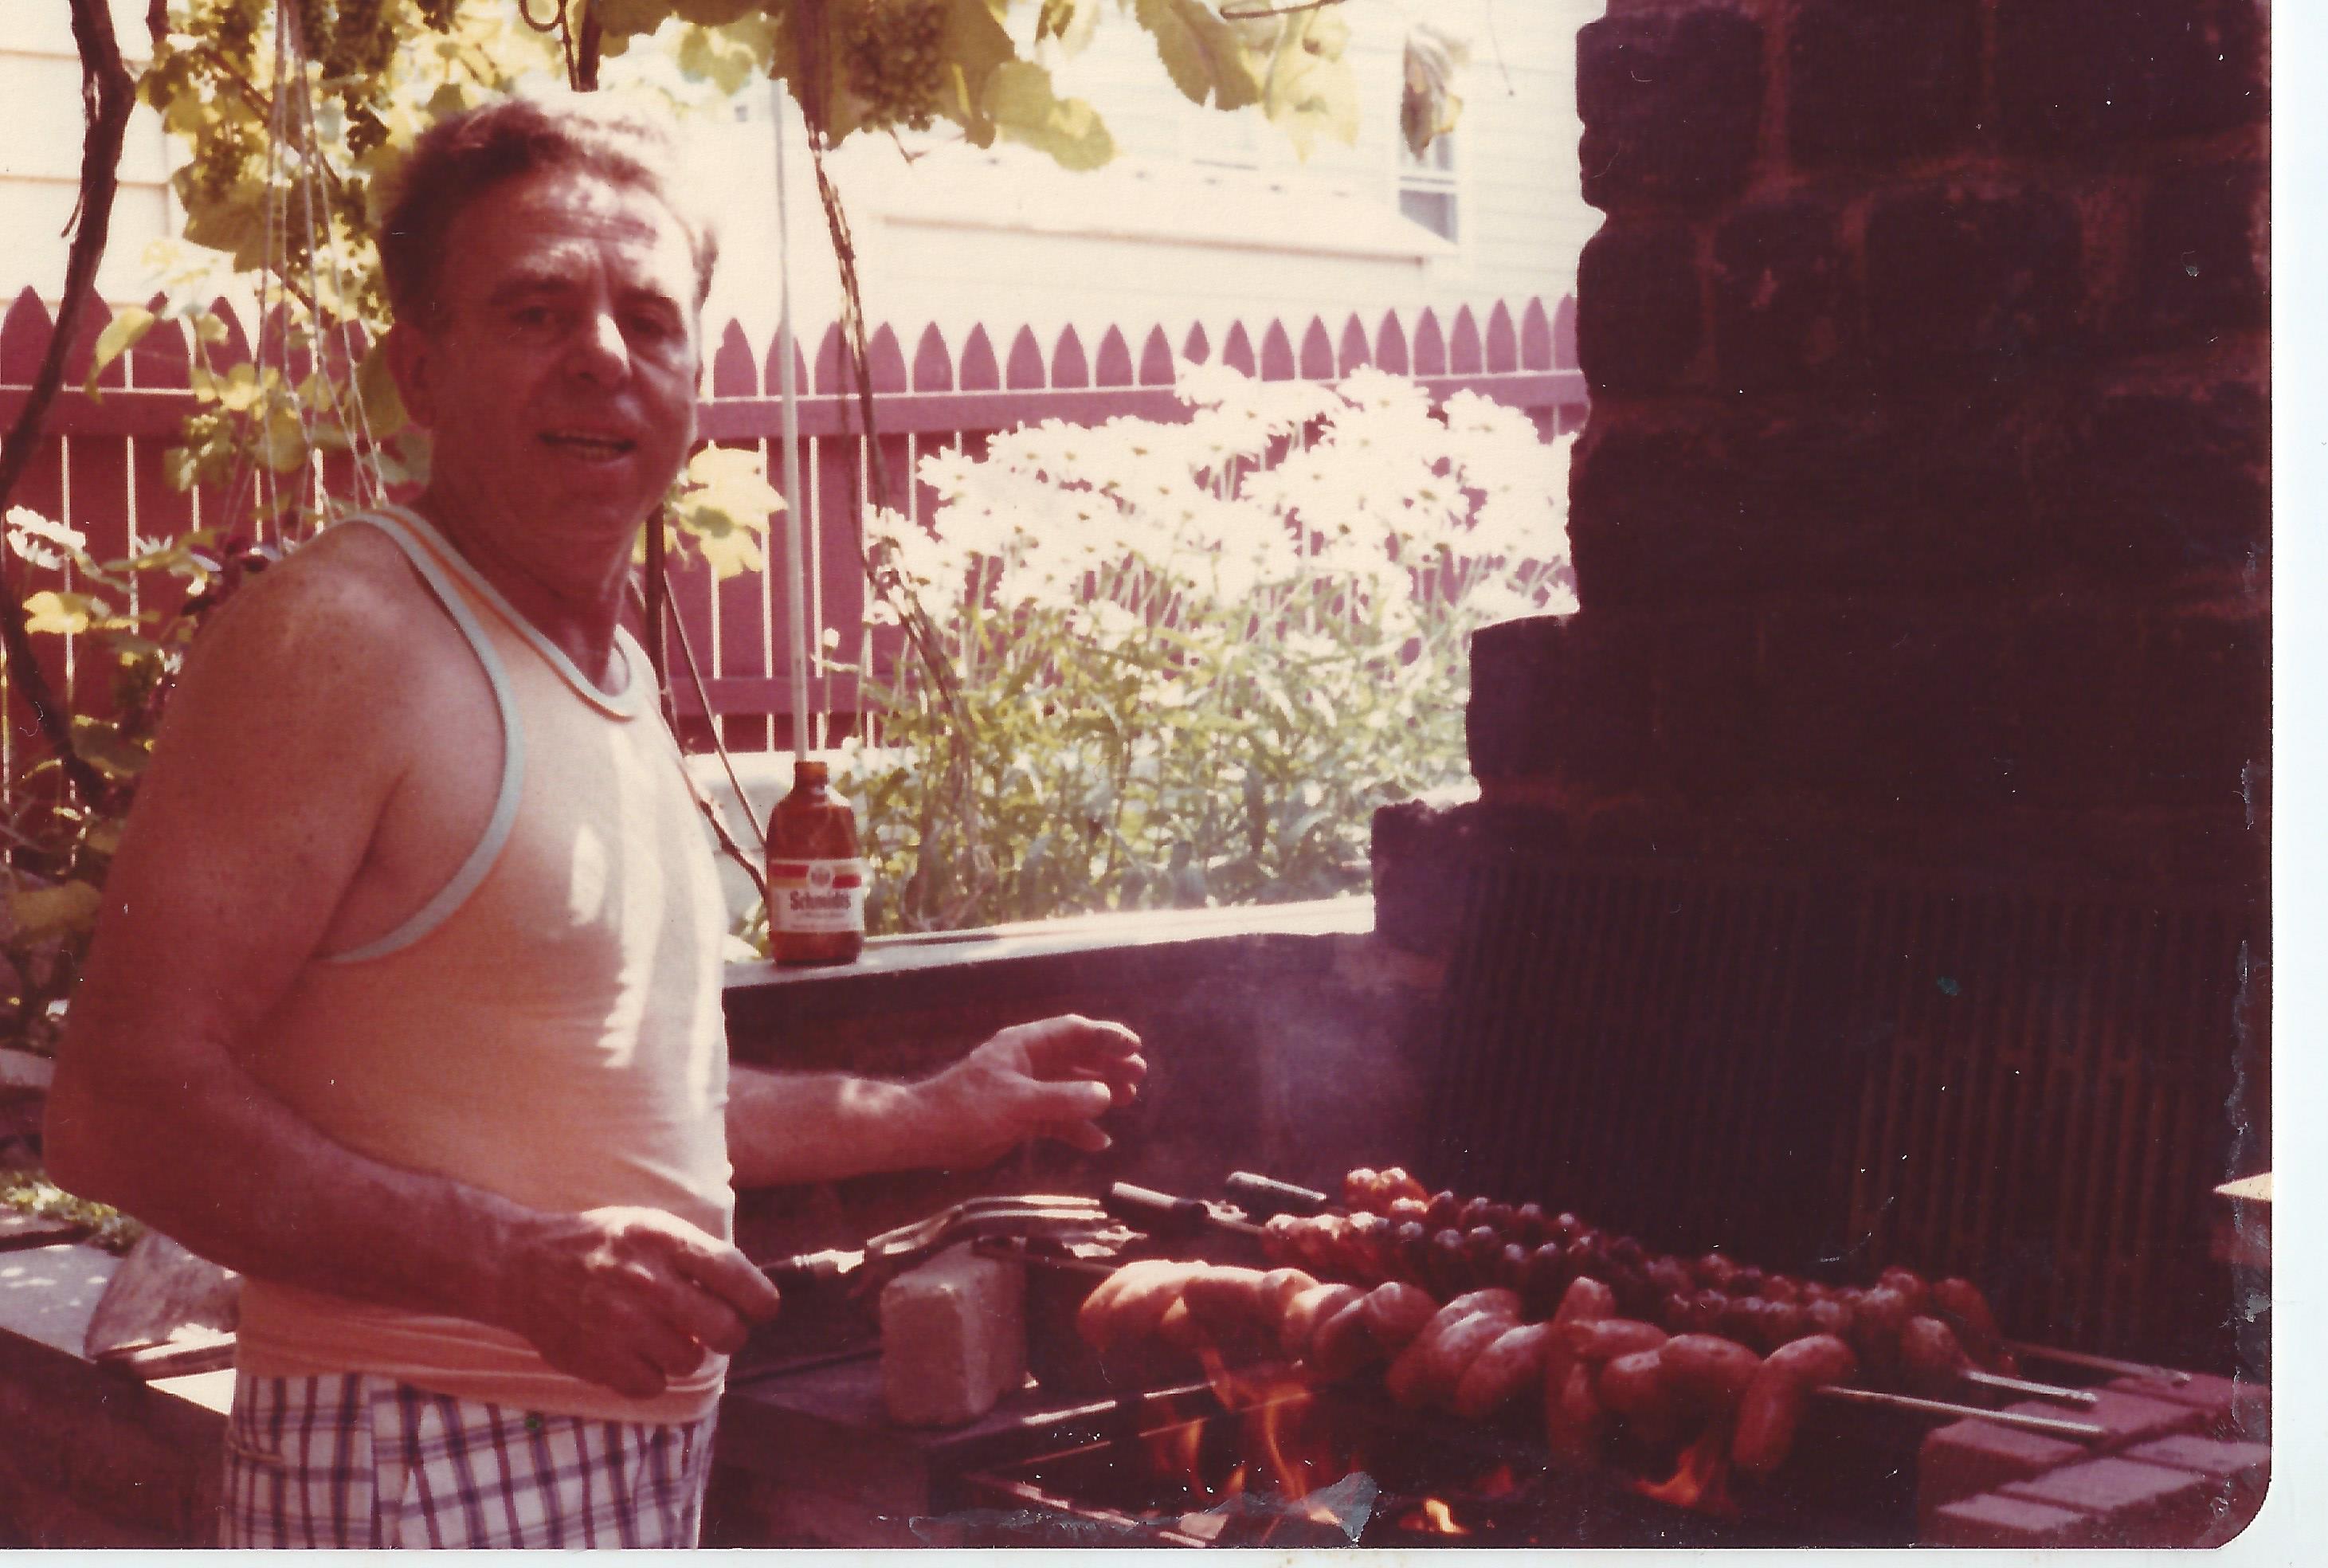 A familiar site, Dad working the grill.